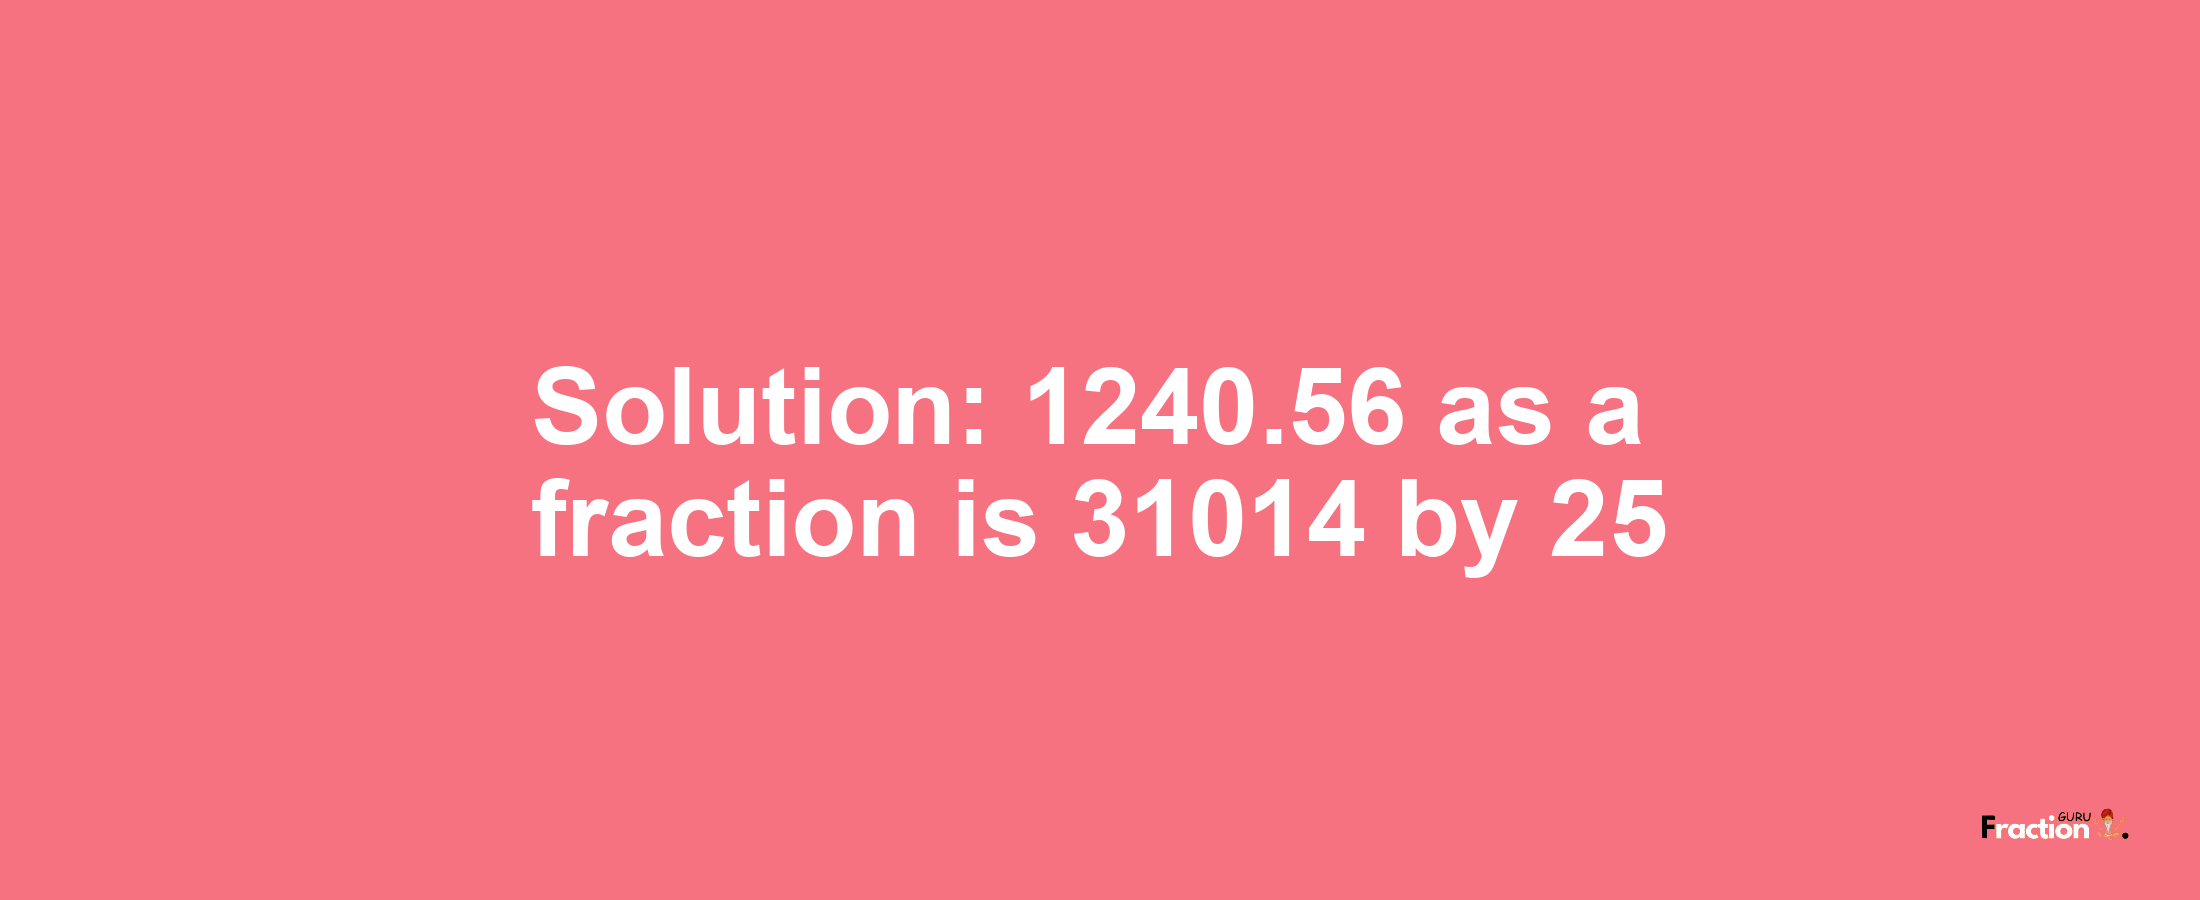 Solution:1240.56 as a fraction is 31014/25